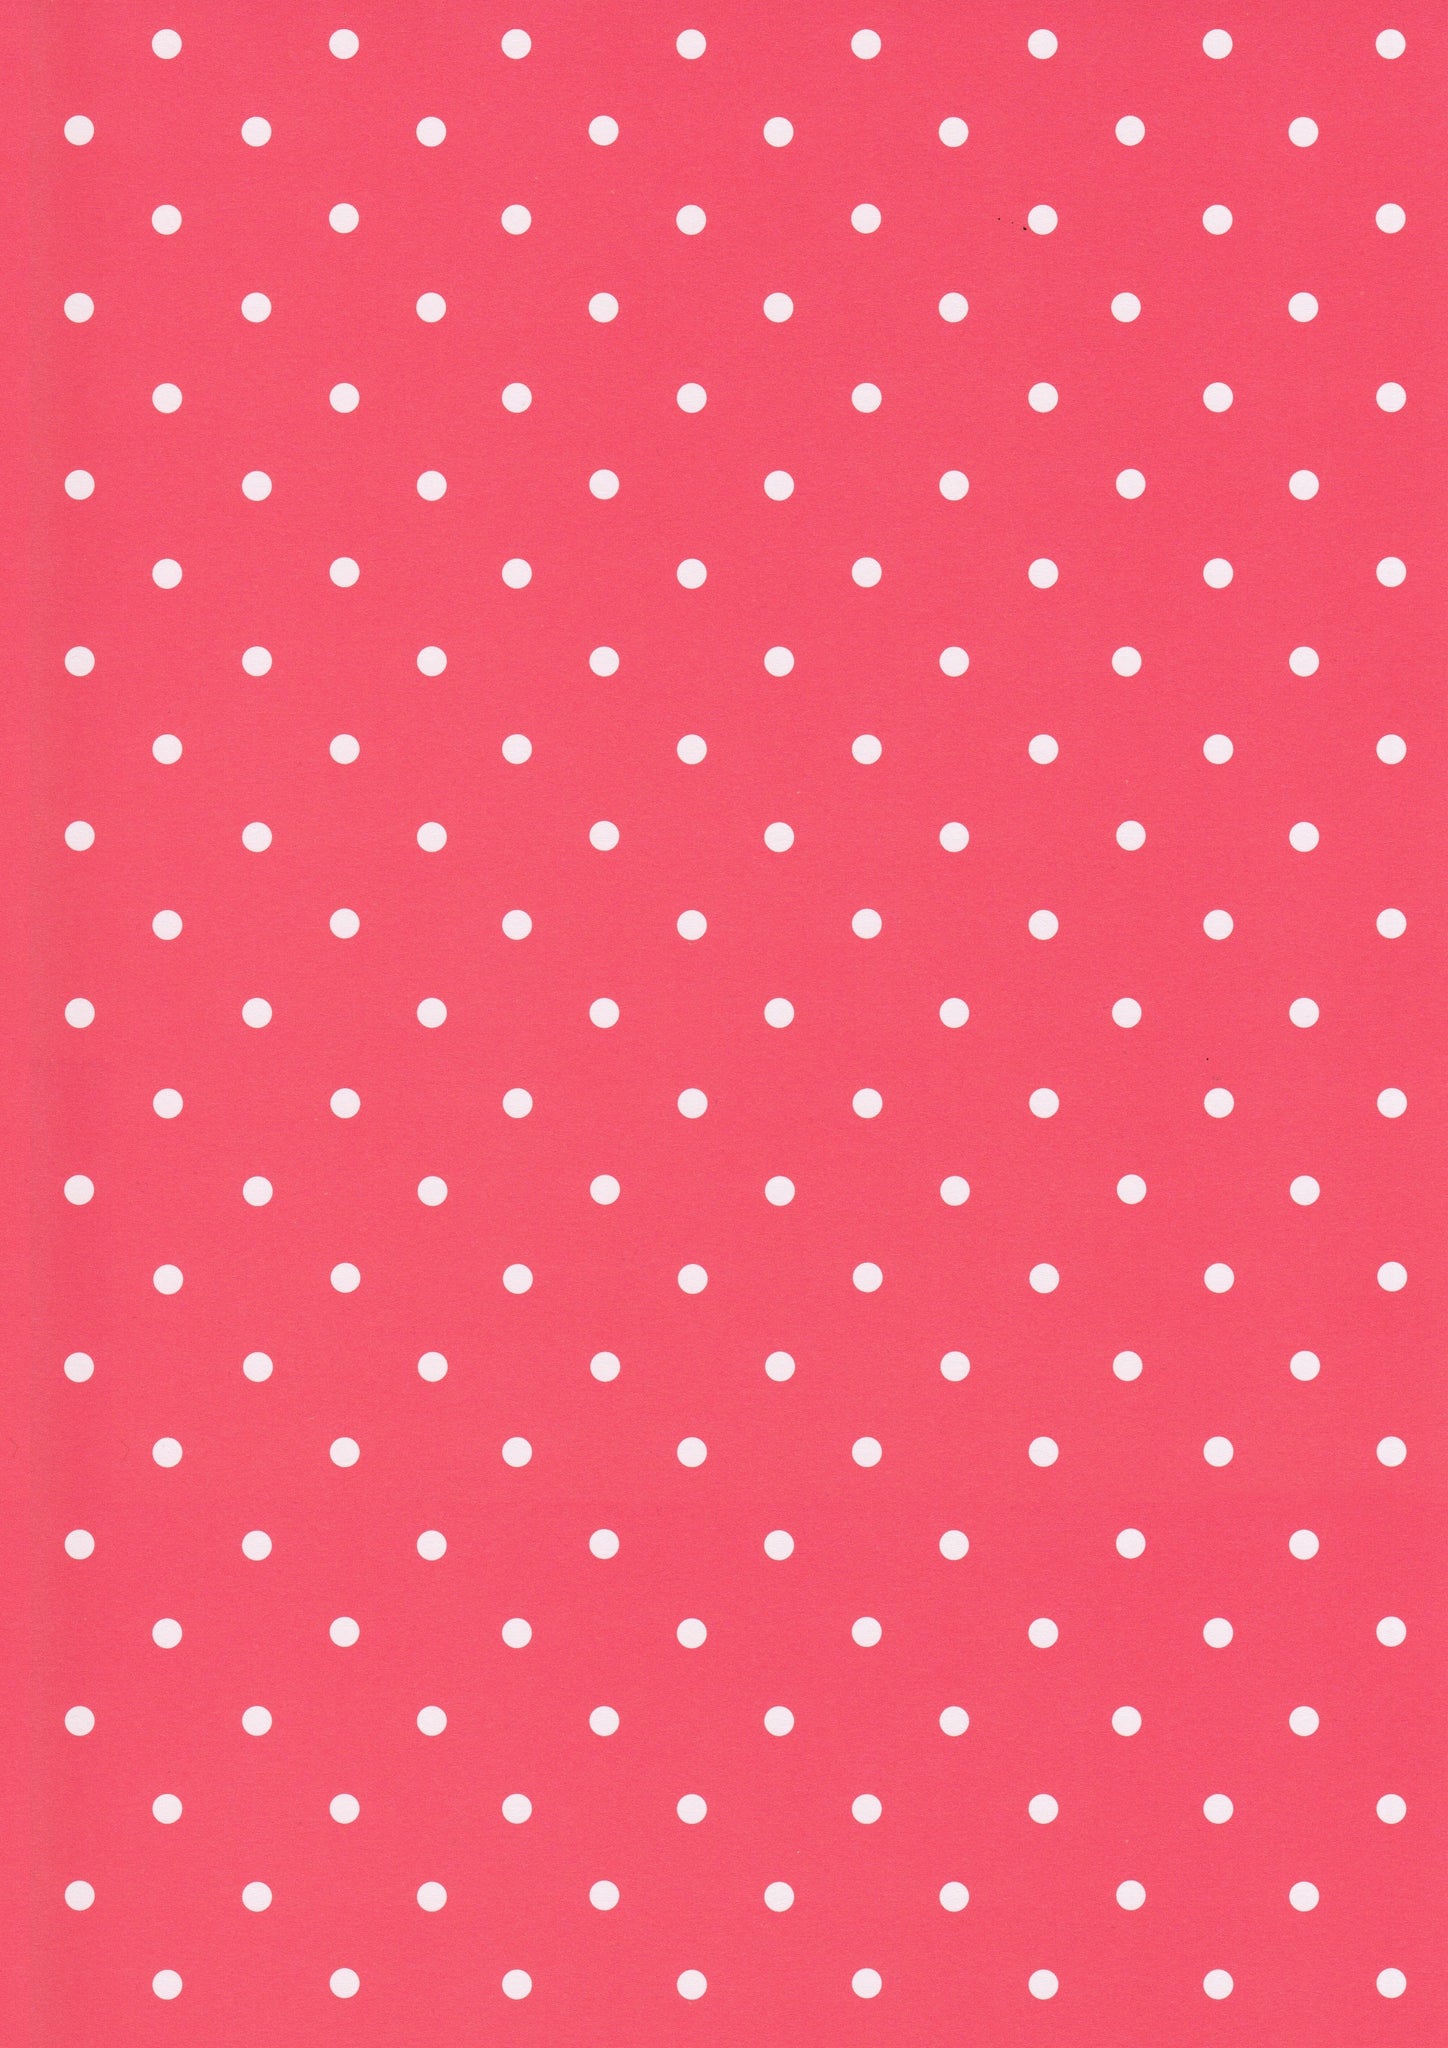 A4 Paper / No.88 Red White Polka Dots